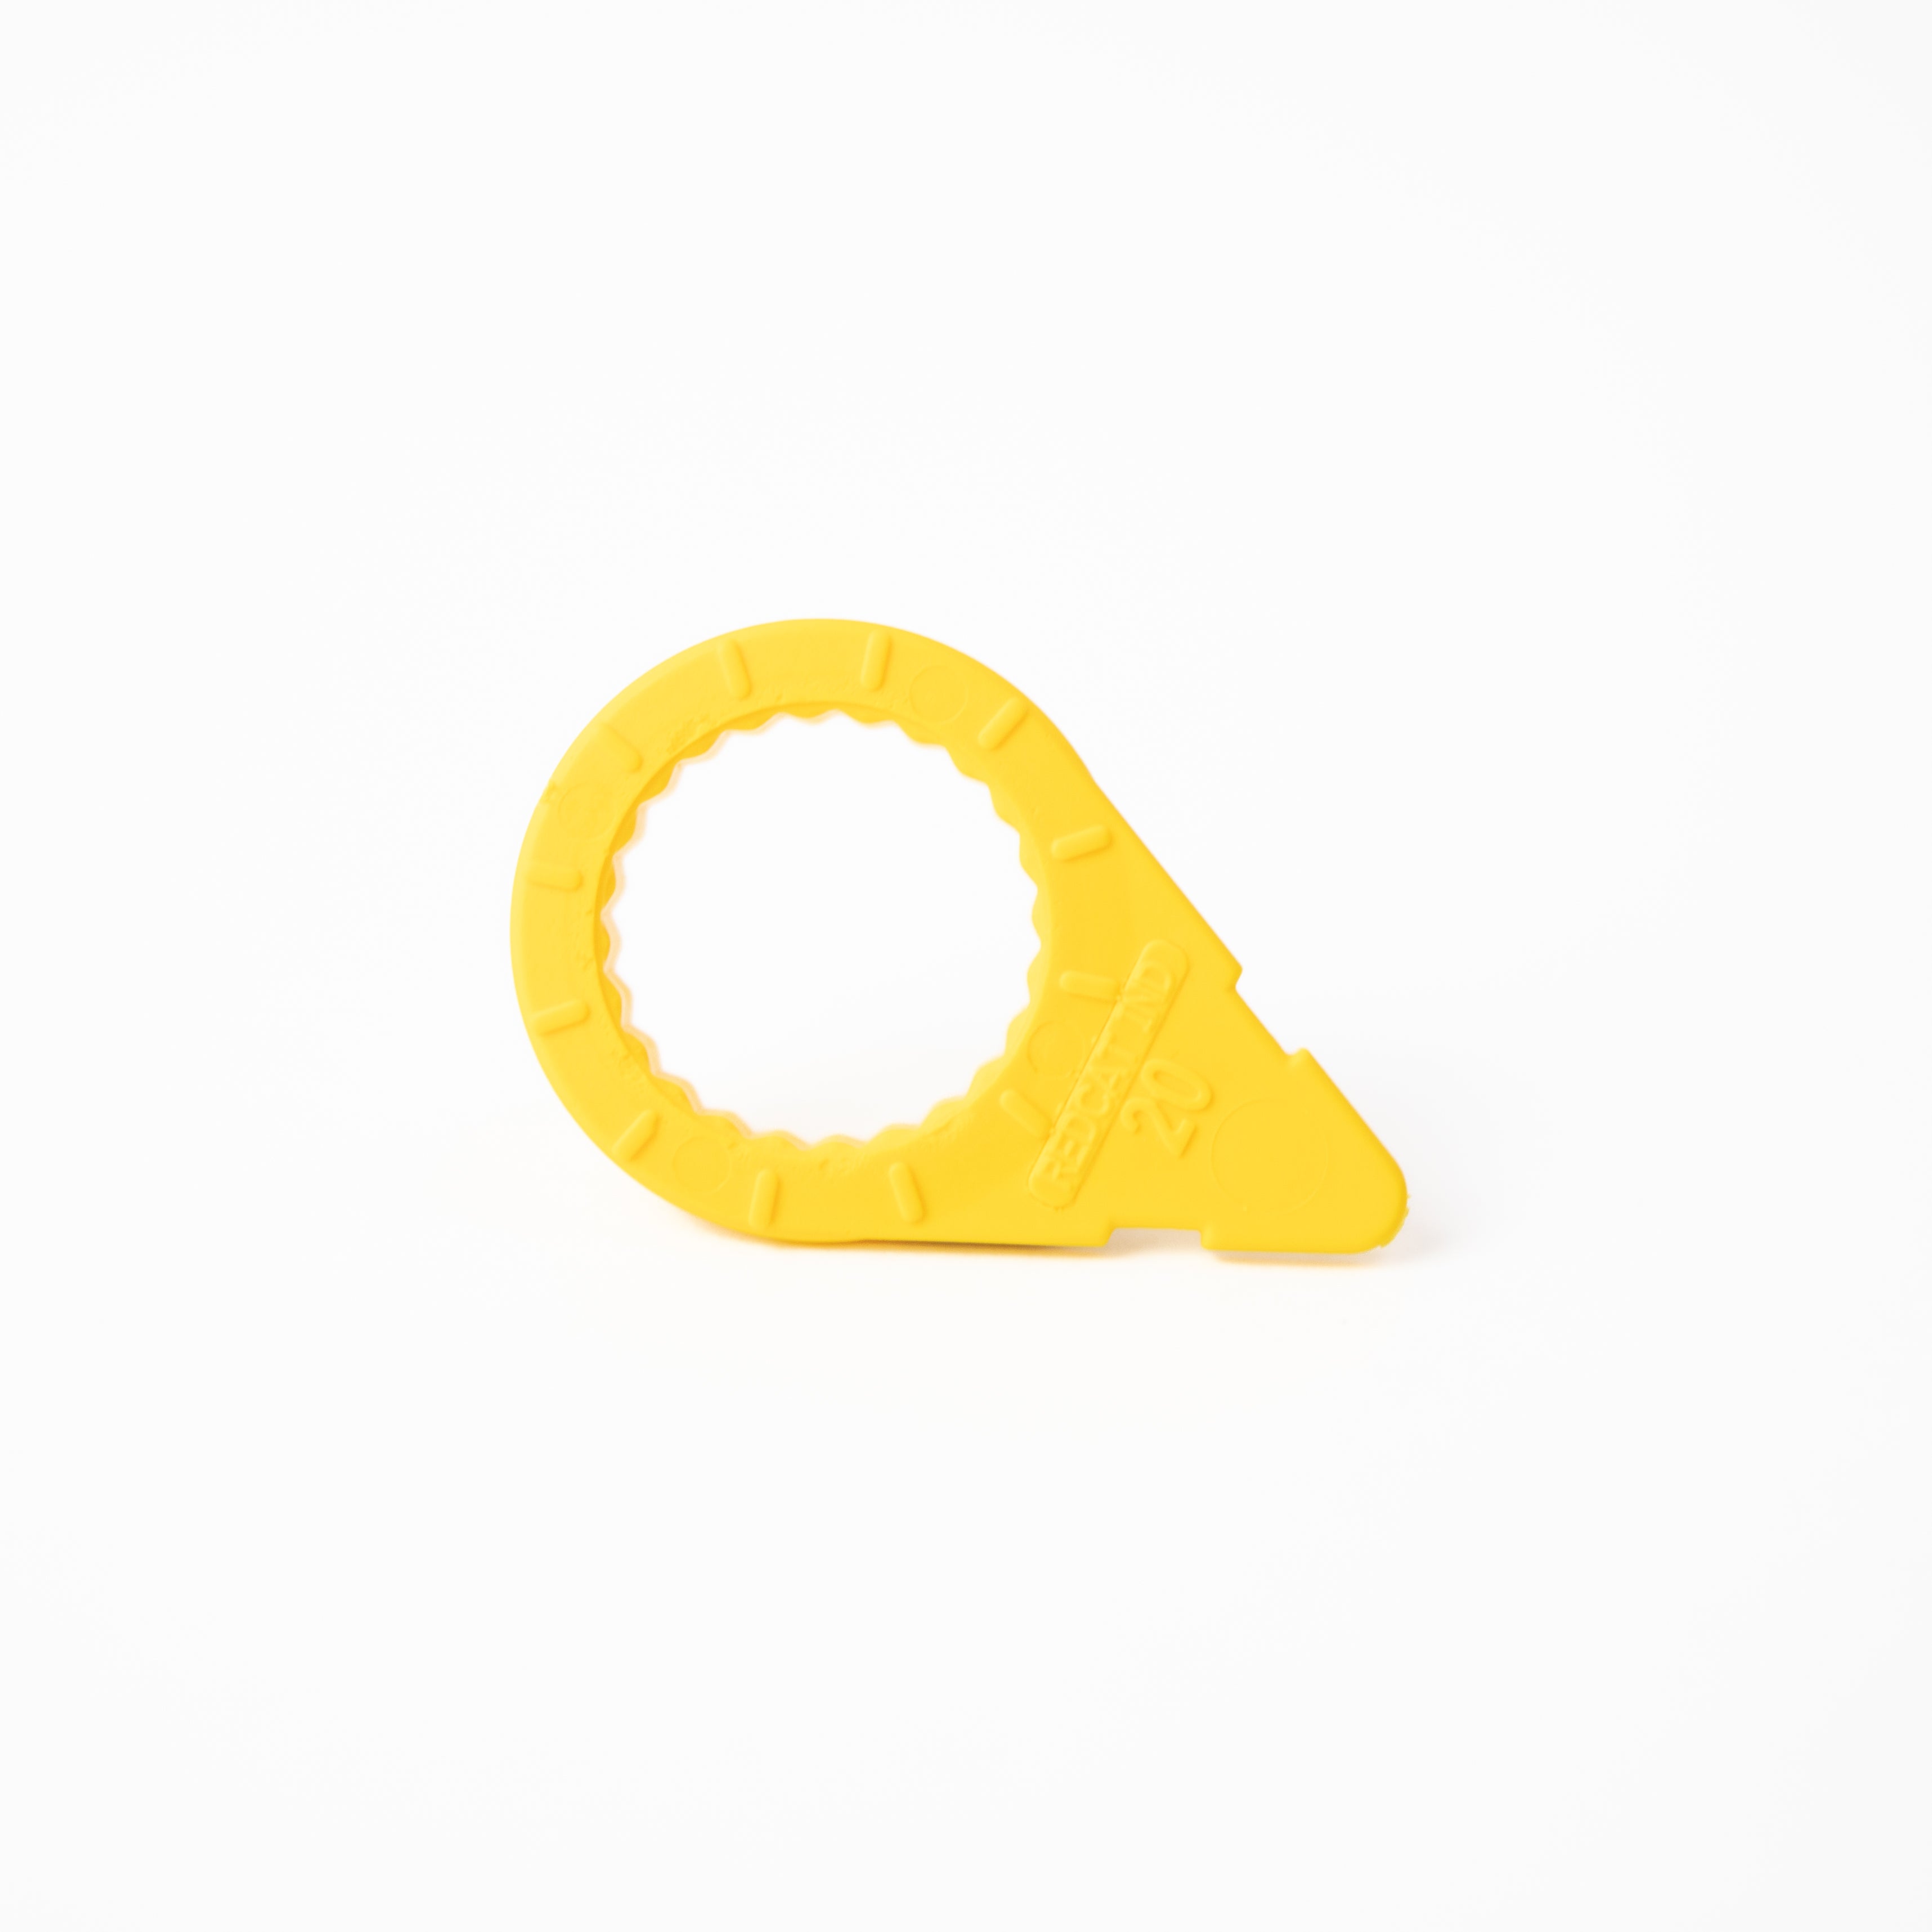 Redcat Standard Wheel Nut Indicator 20MM Yellow Pack of 100